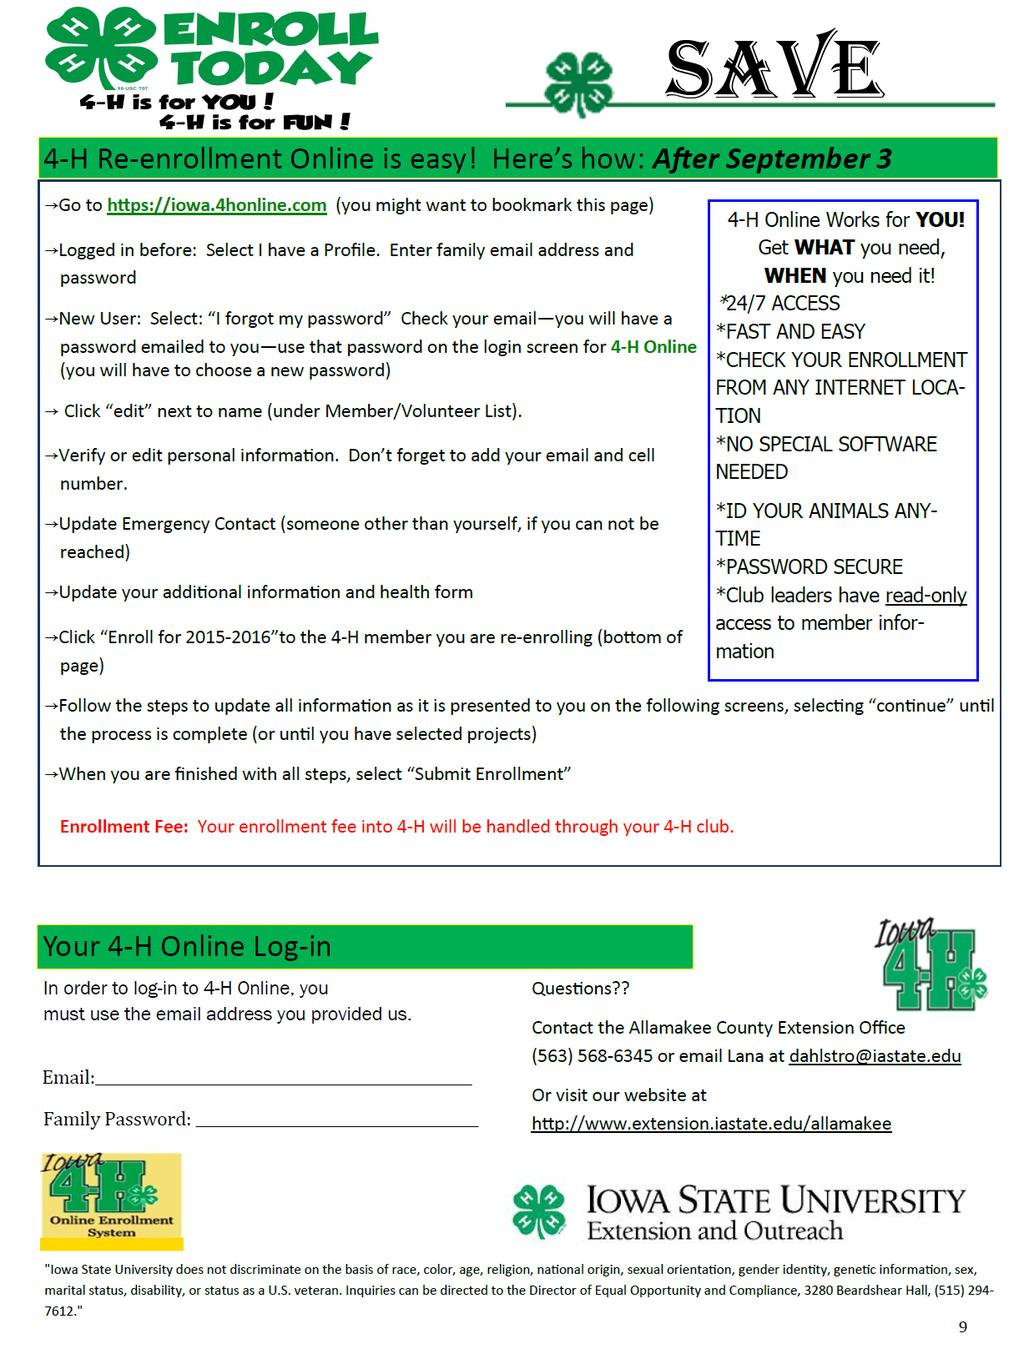 2 FINANCIAL ASSISTANCE AVAILABLE Iowa 4-H Foundation Offers Financial Assistance to Pay Enrollment Fees Financial assistance is available from the Iowa 4-H Foundation for families who need help